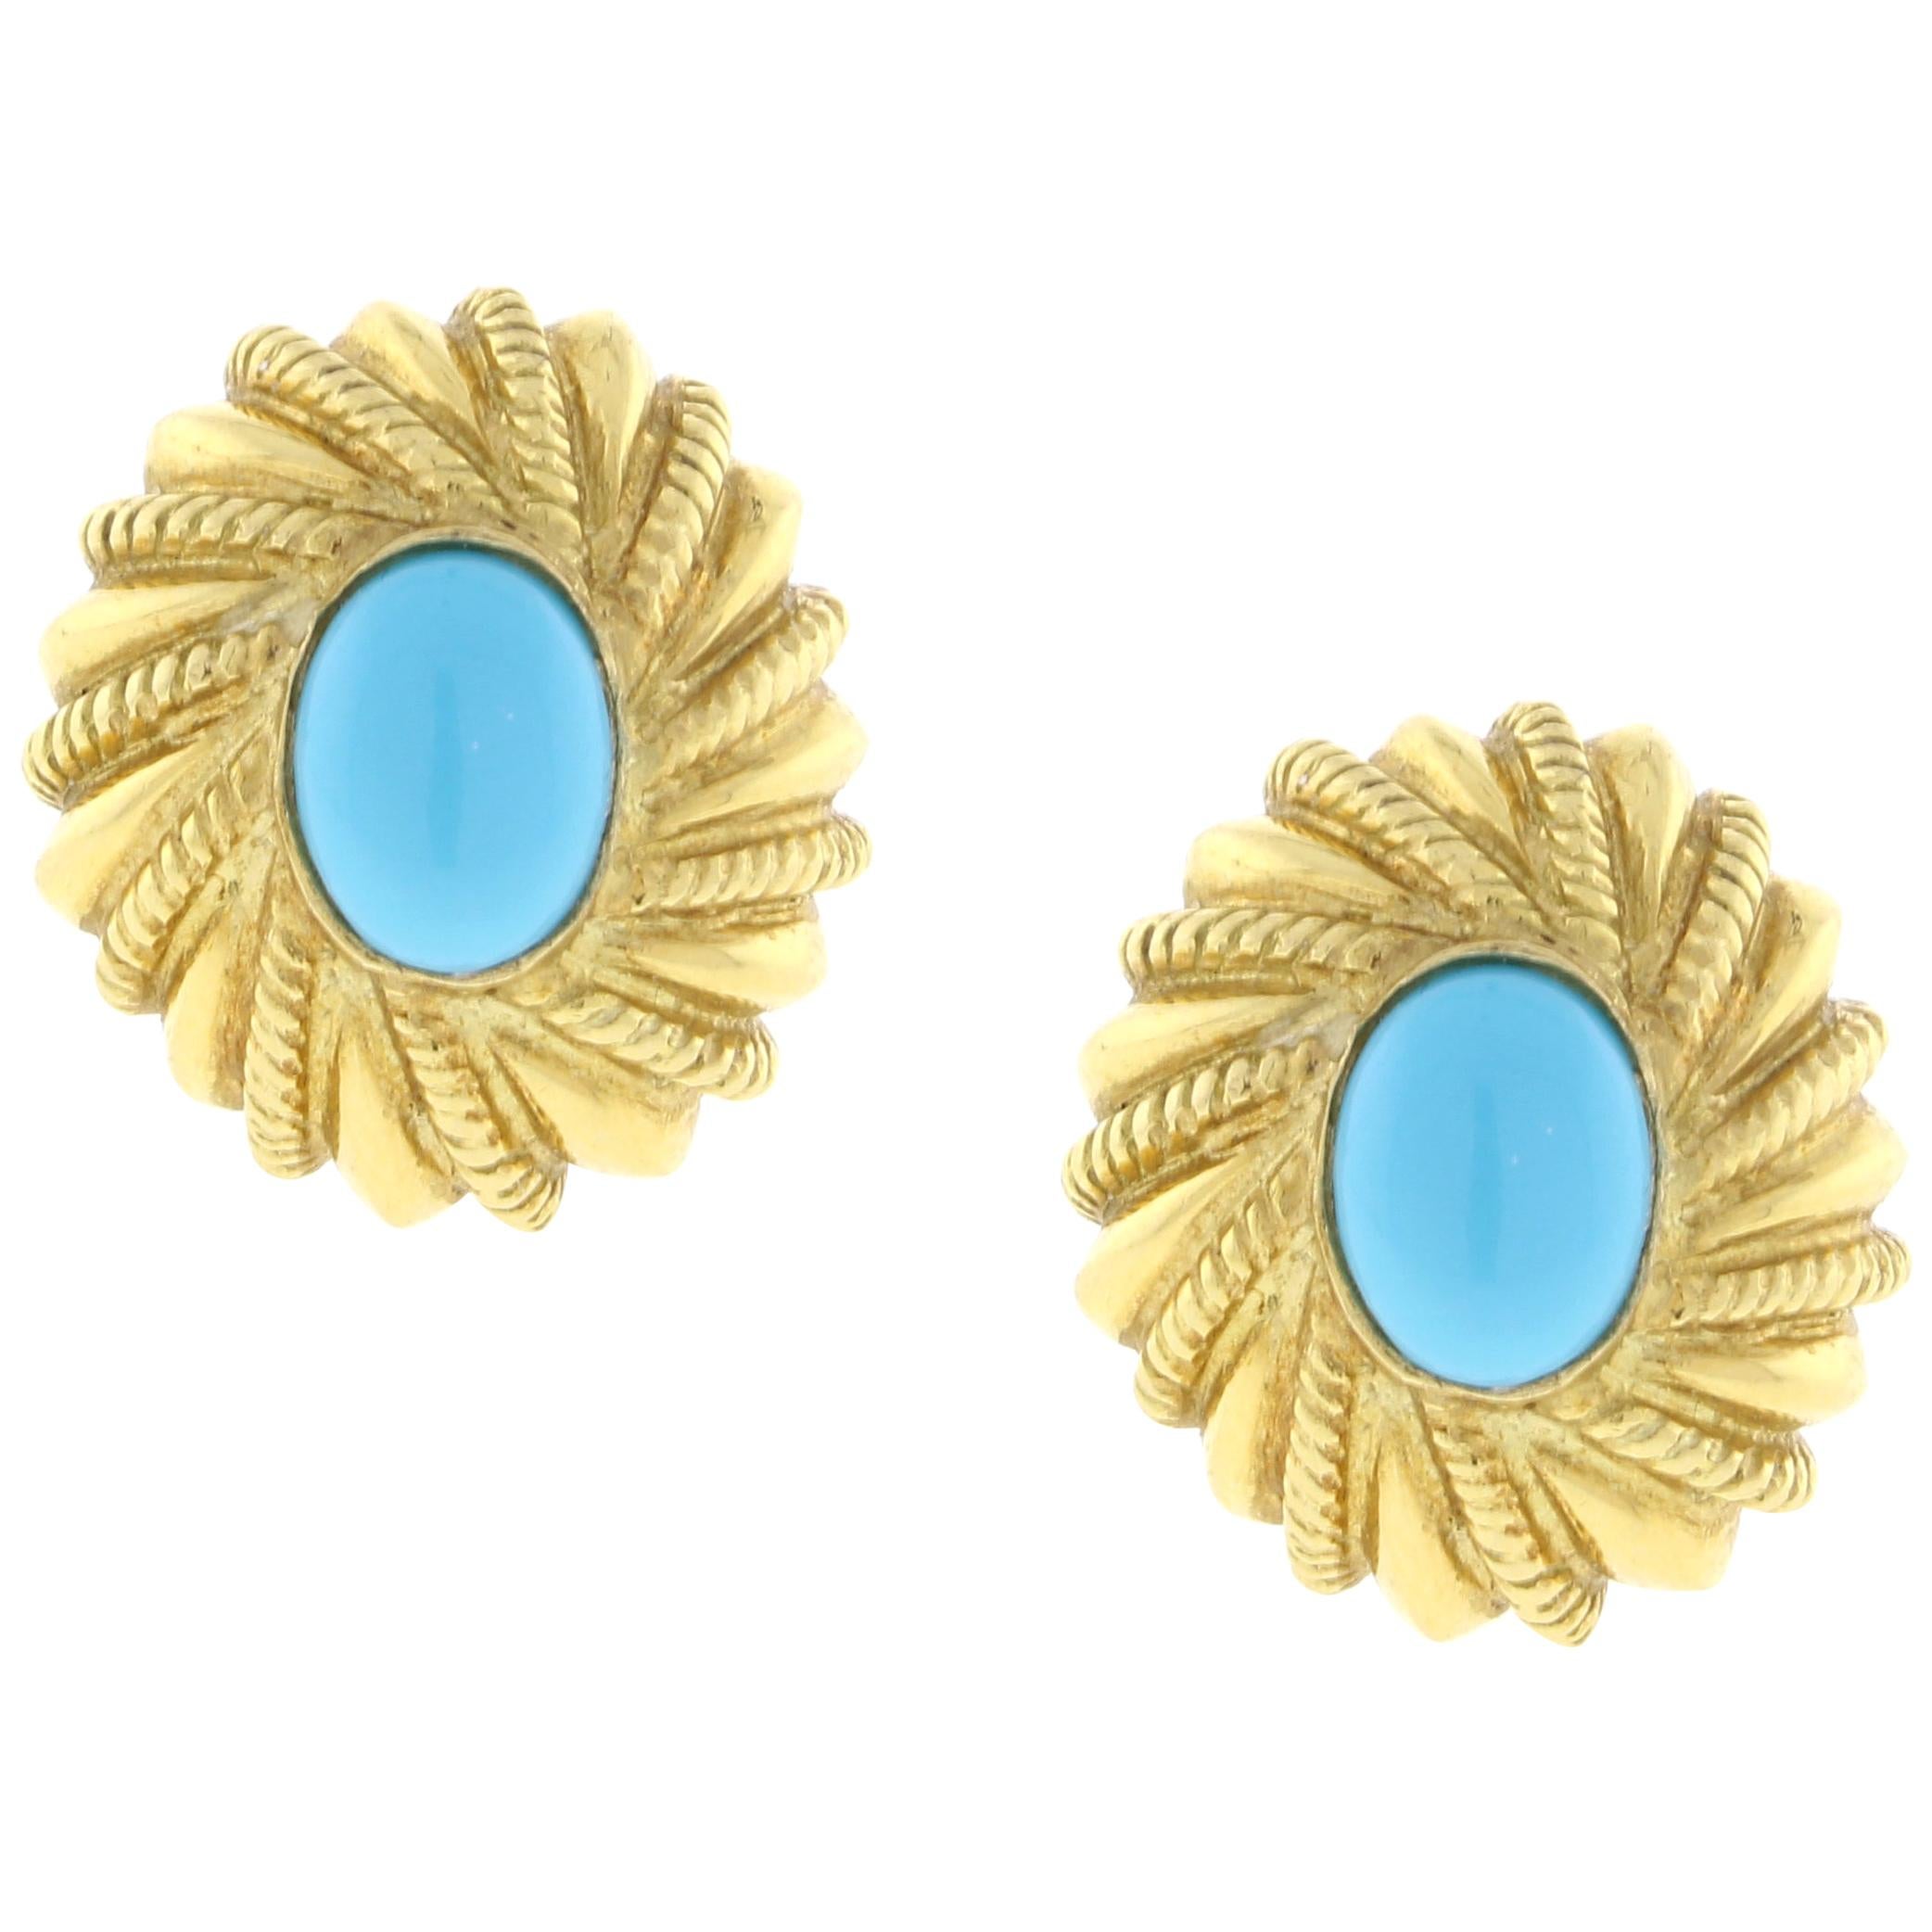 Tiffany & Co. Schlumberger Turquoise Earrings